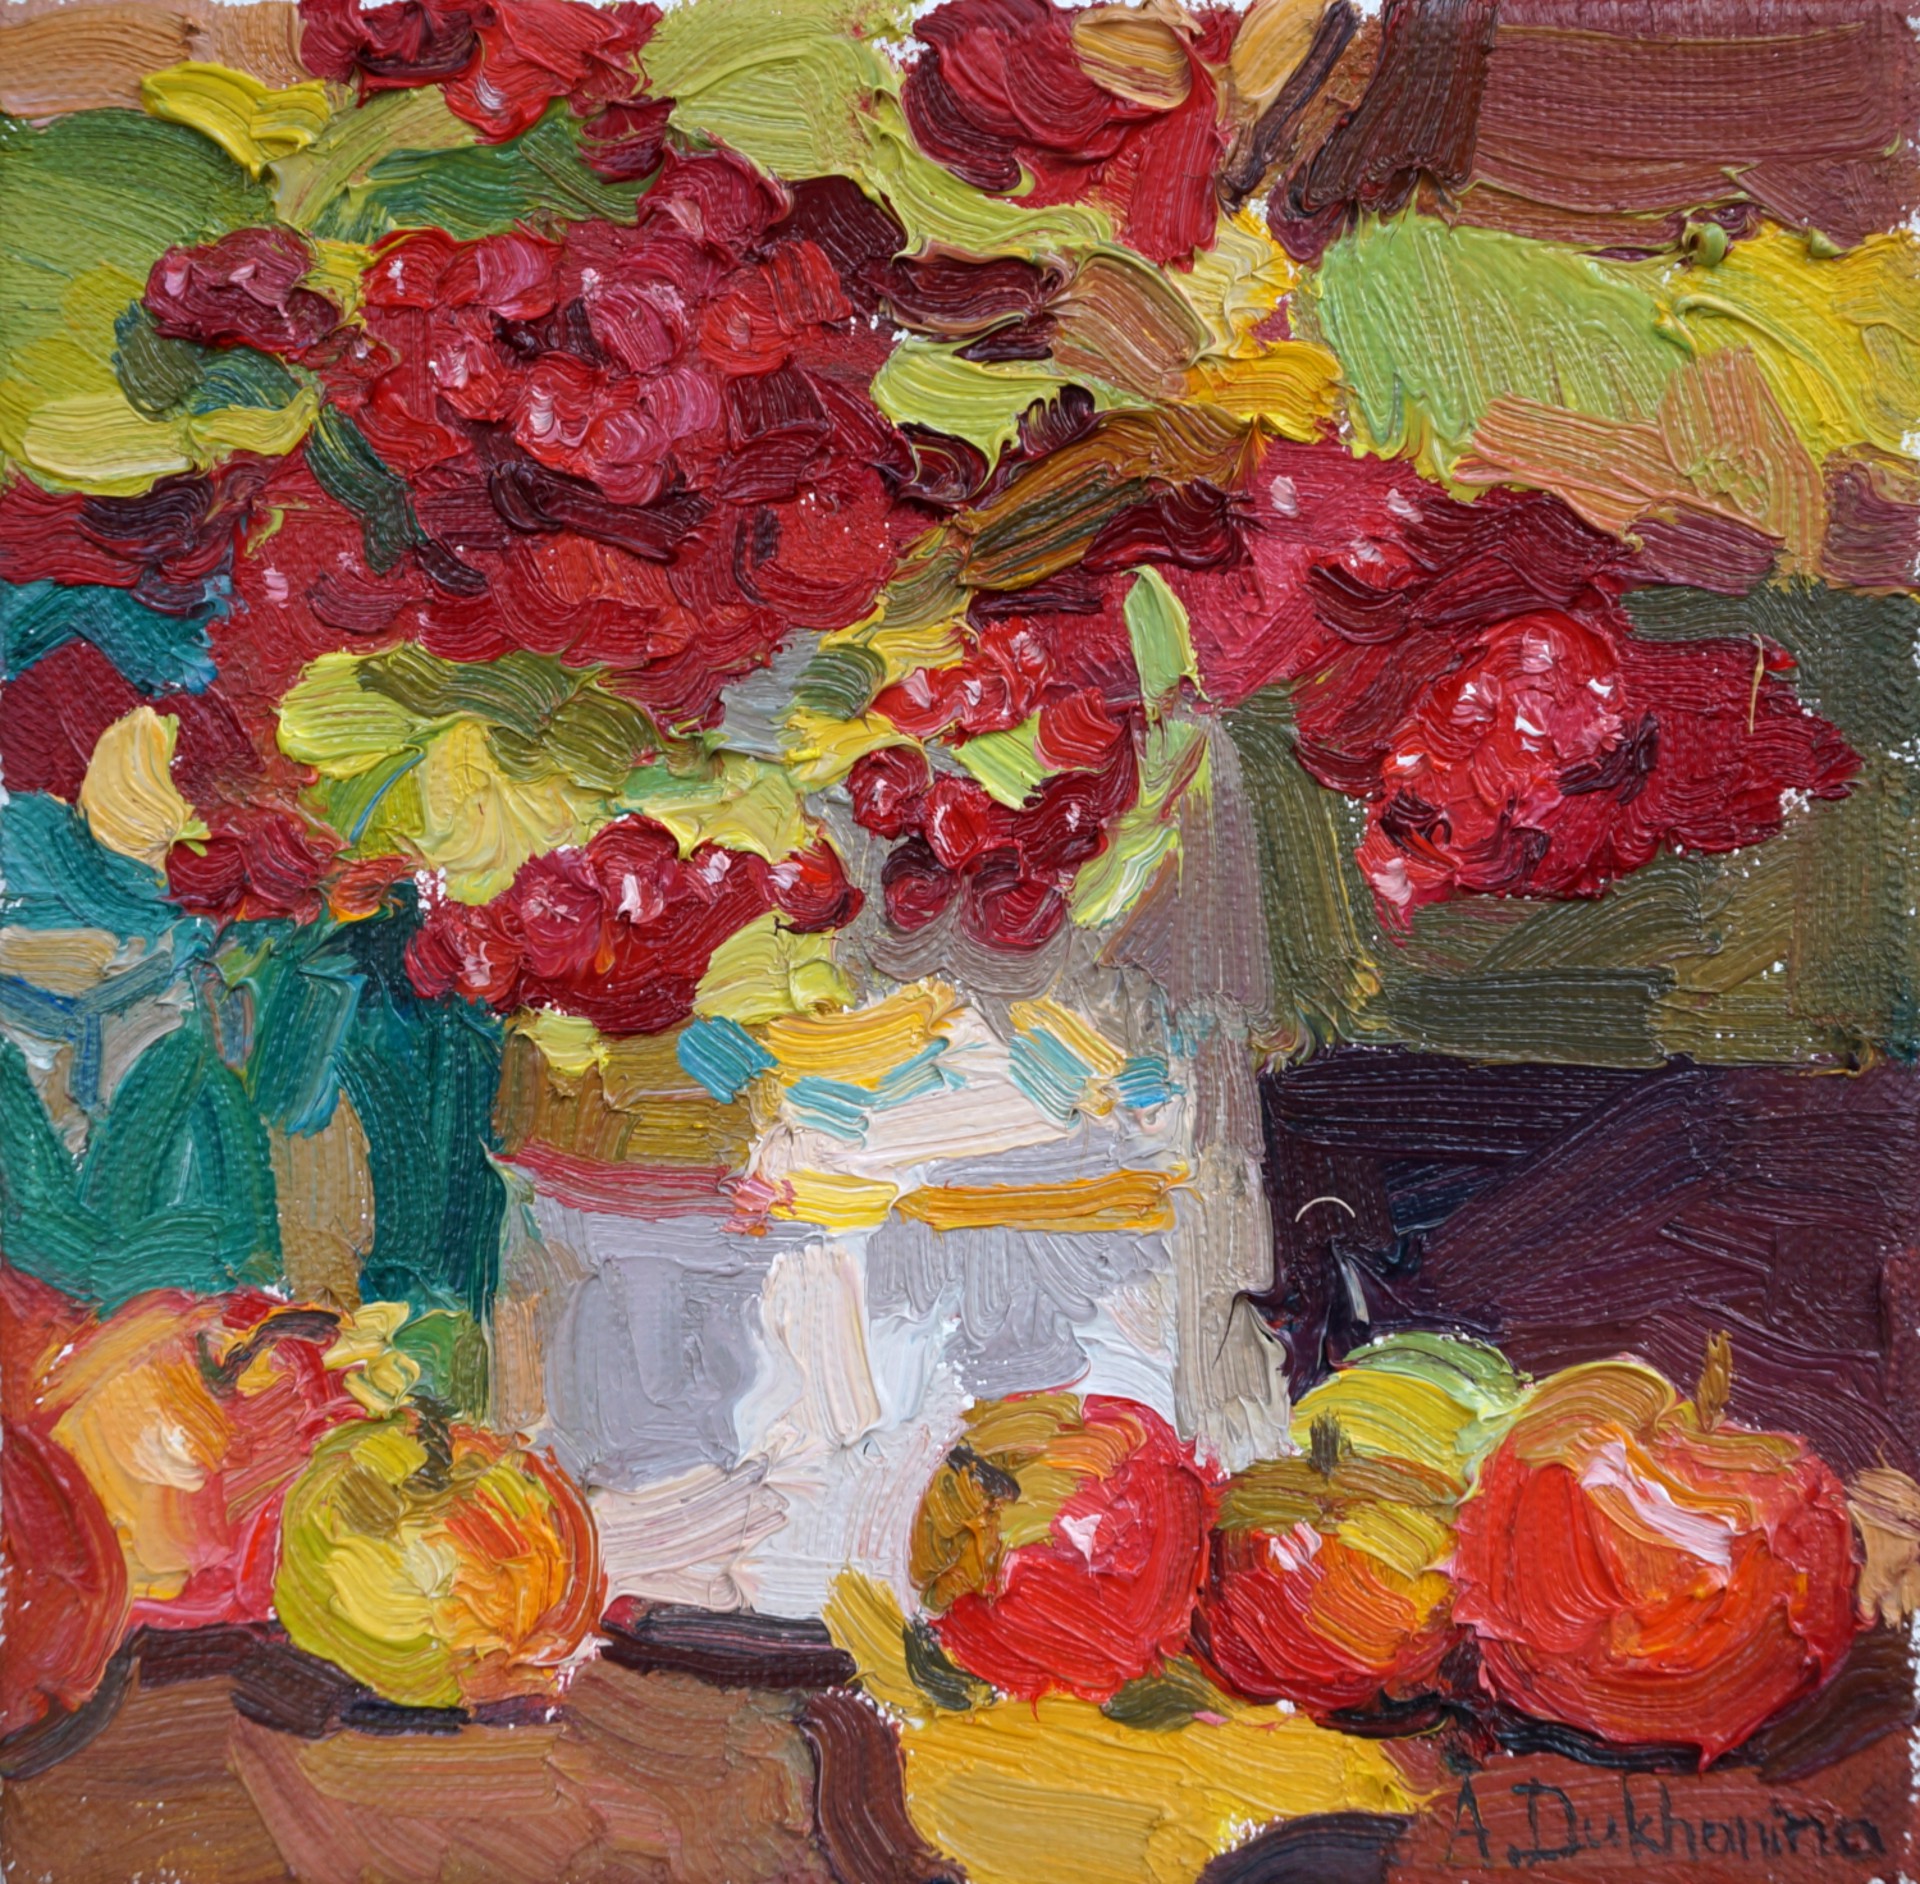 "Apples and Berries" original oil painting by Anastasia Dukhanina